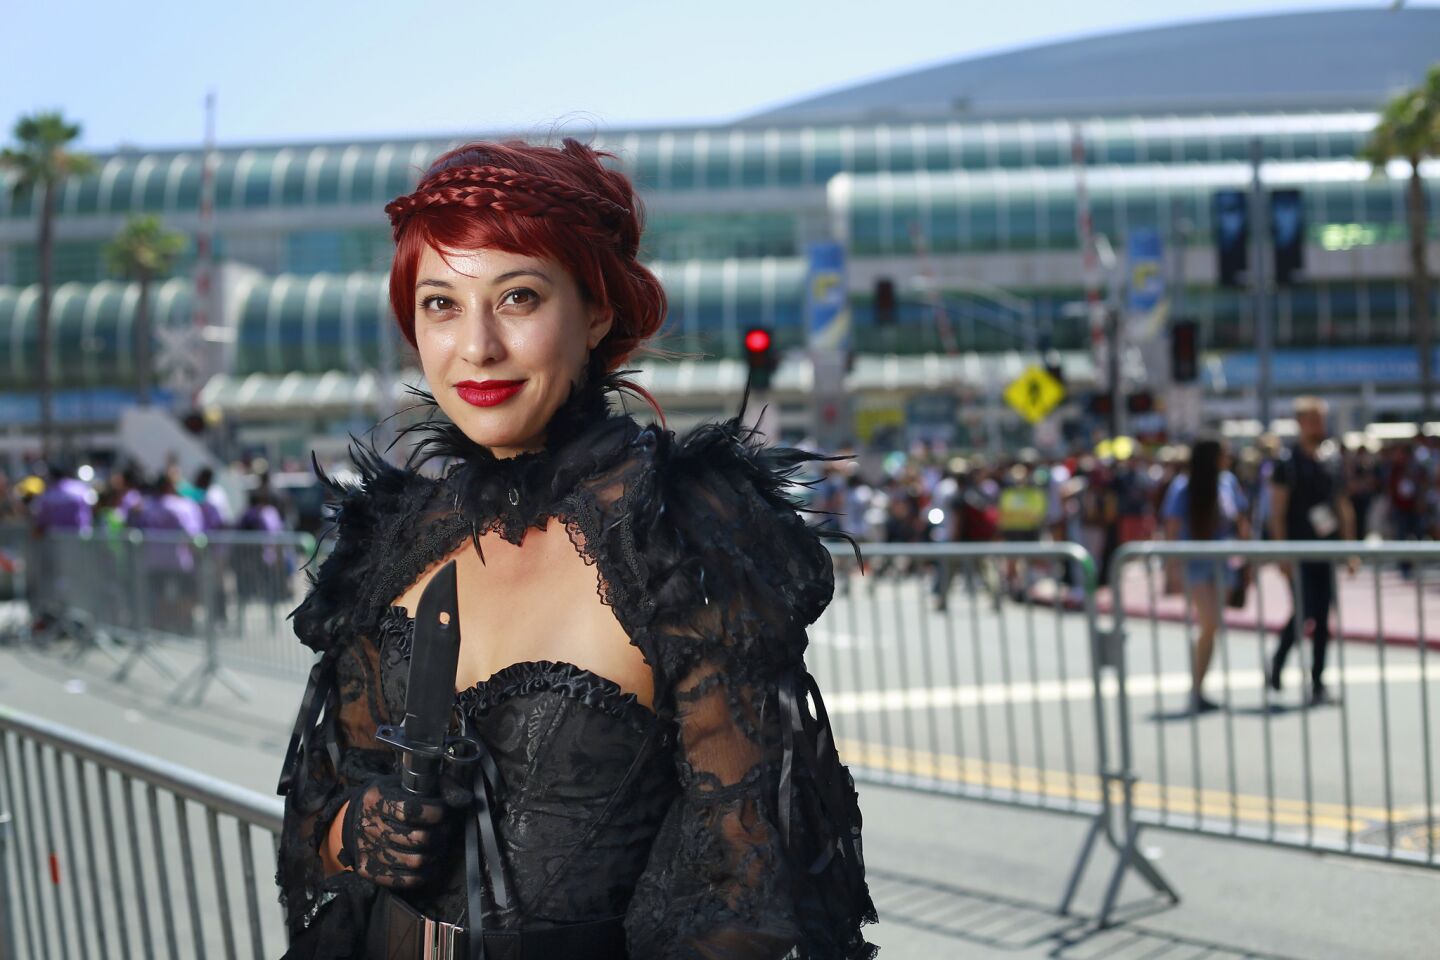 Tiffany Kellbach of San Diego as the Widow from "Into the Badlands."